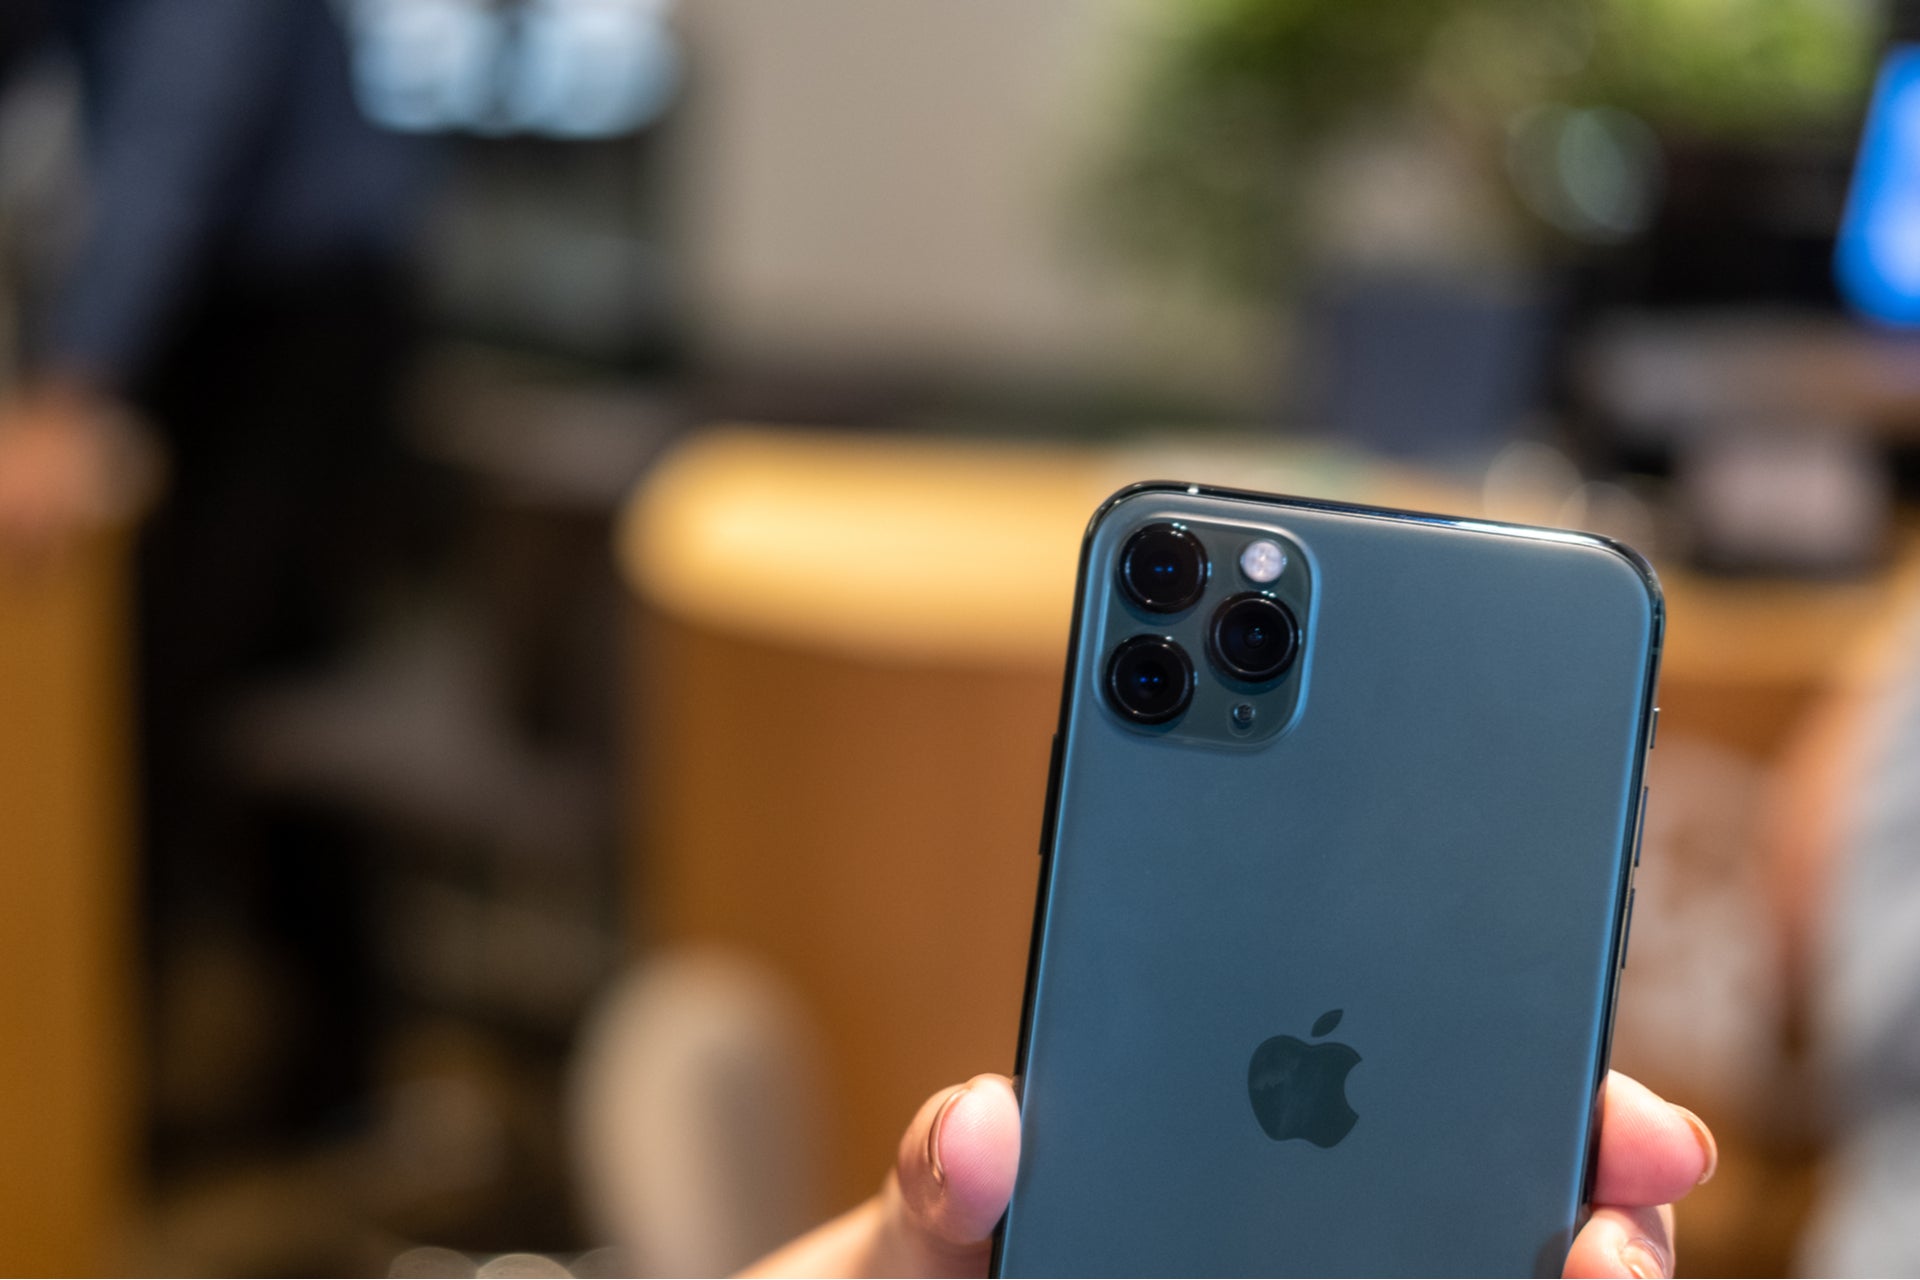 iPhone 11 Pro Max review: Can Apple’s luxury smartphone restore consumers’ faith?